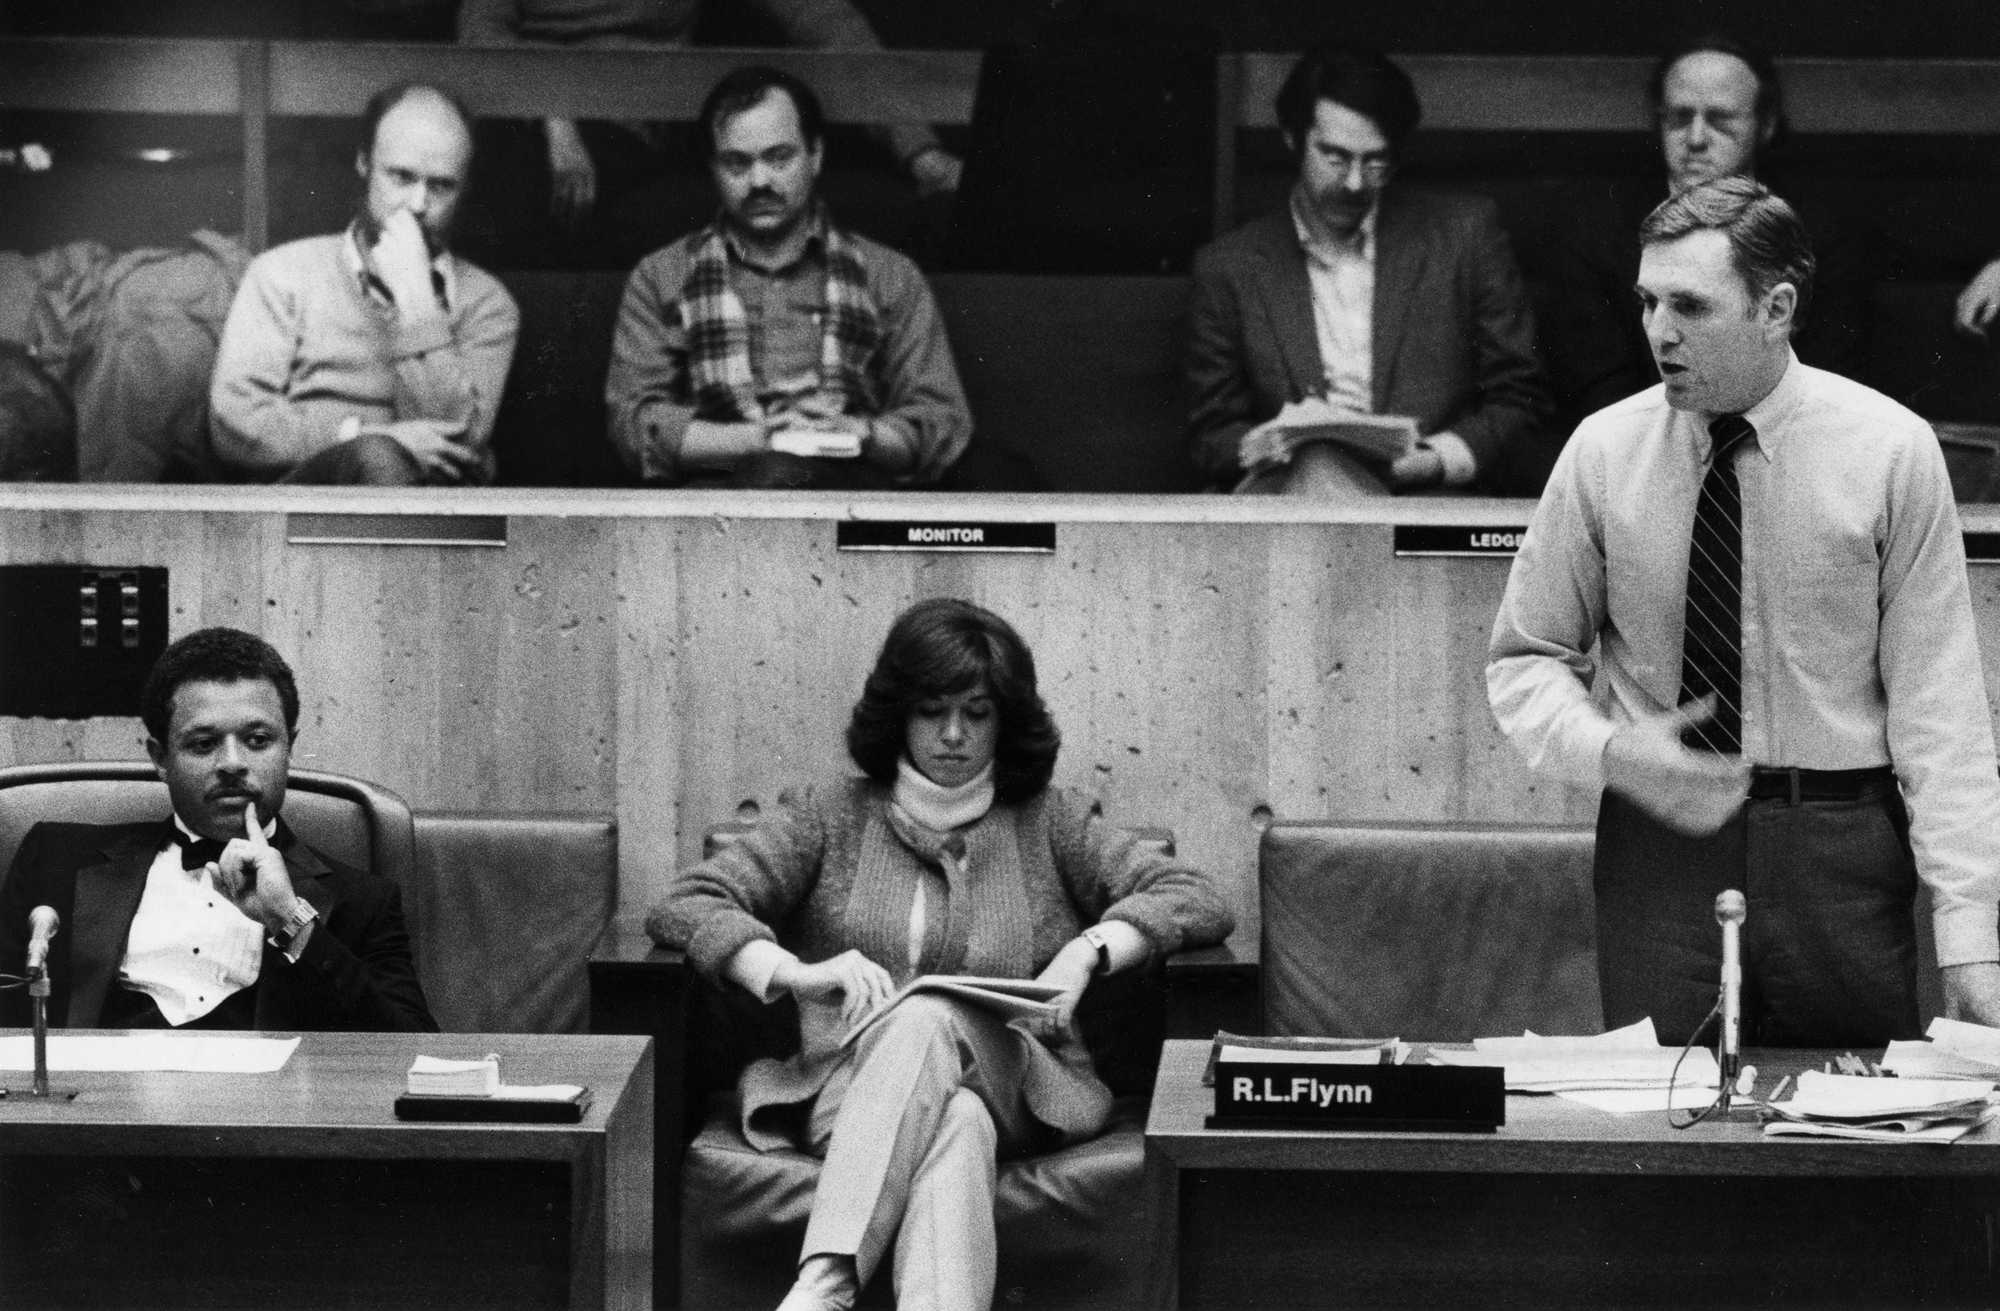 Boston, MA - 12/31/1982: Ray Flynn speaks out against passing a rent control bill at a City Council meeting in Boston, Dec. 31, 1982.  (Janet Knott/Globe Staff) --- BGPA Reference: 170912_ON_006